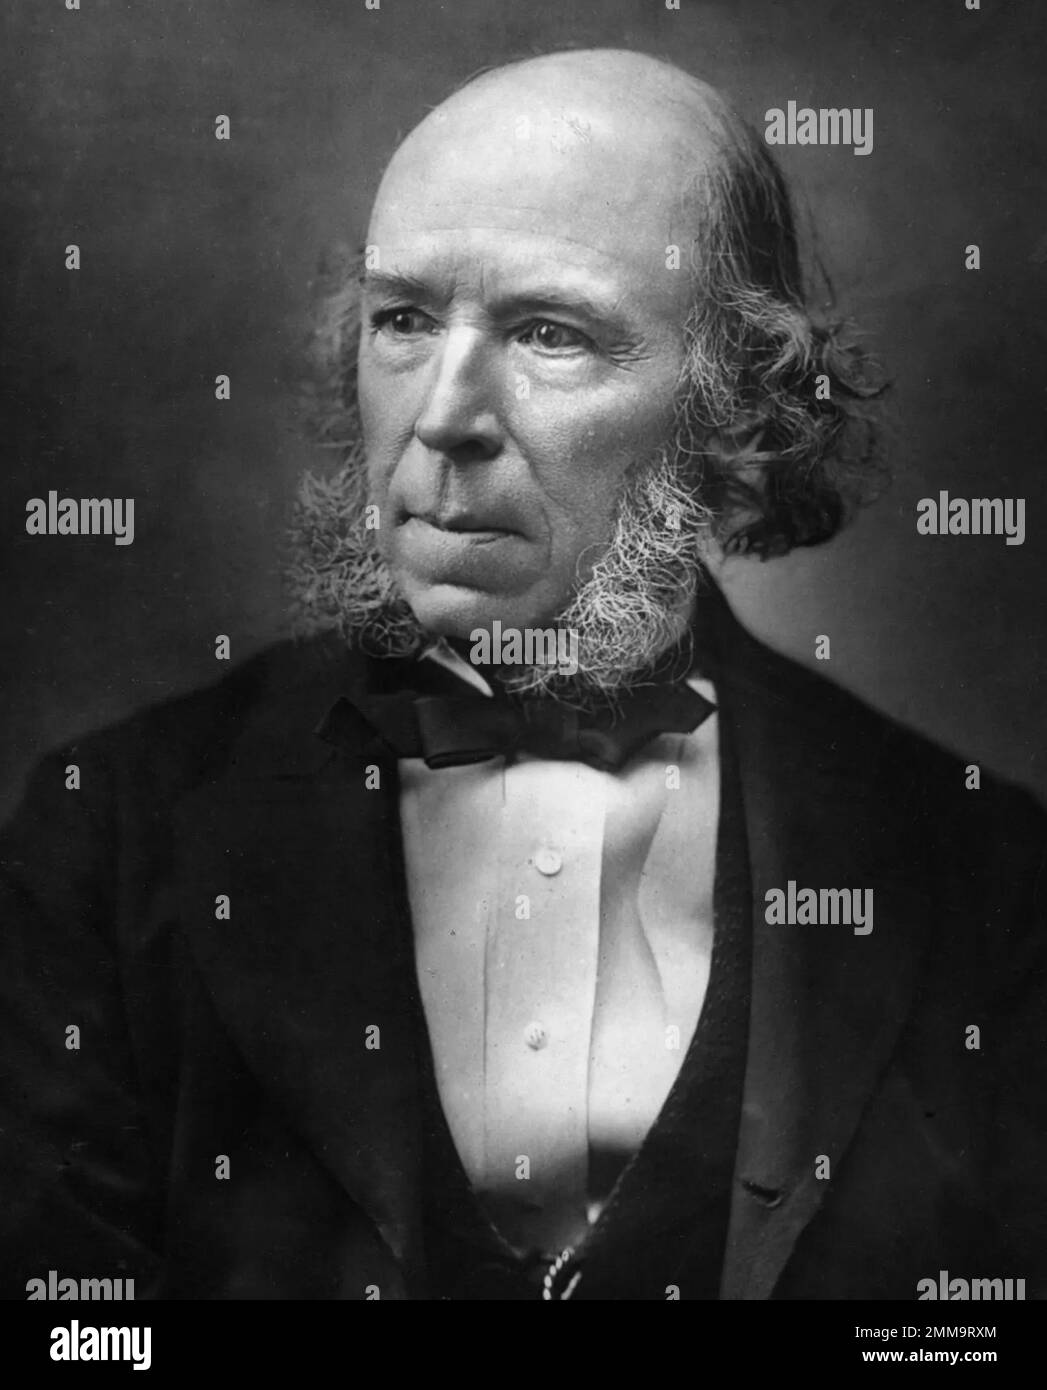 Herbert Spencer (1820 – 1903) English philosopher, psychologist, biologist, anthropologist, and sociologist famous for his hypothesis of social Darwinism. Stock Photo